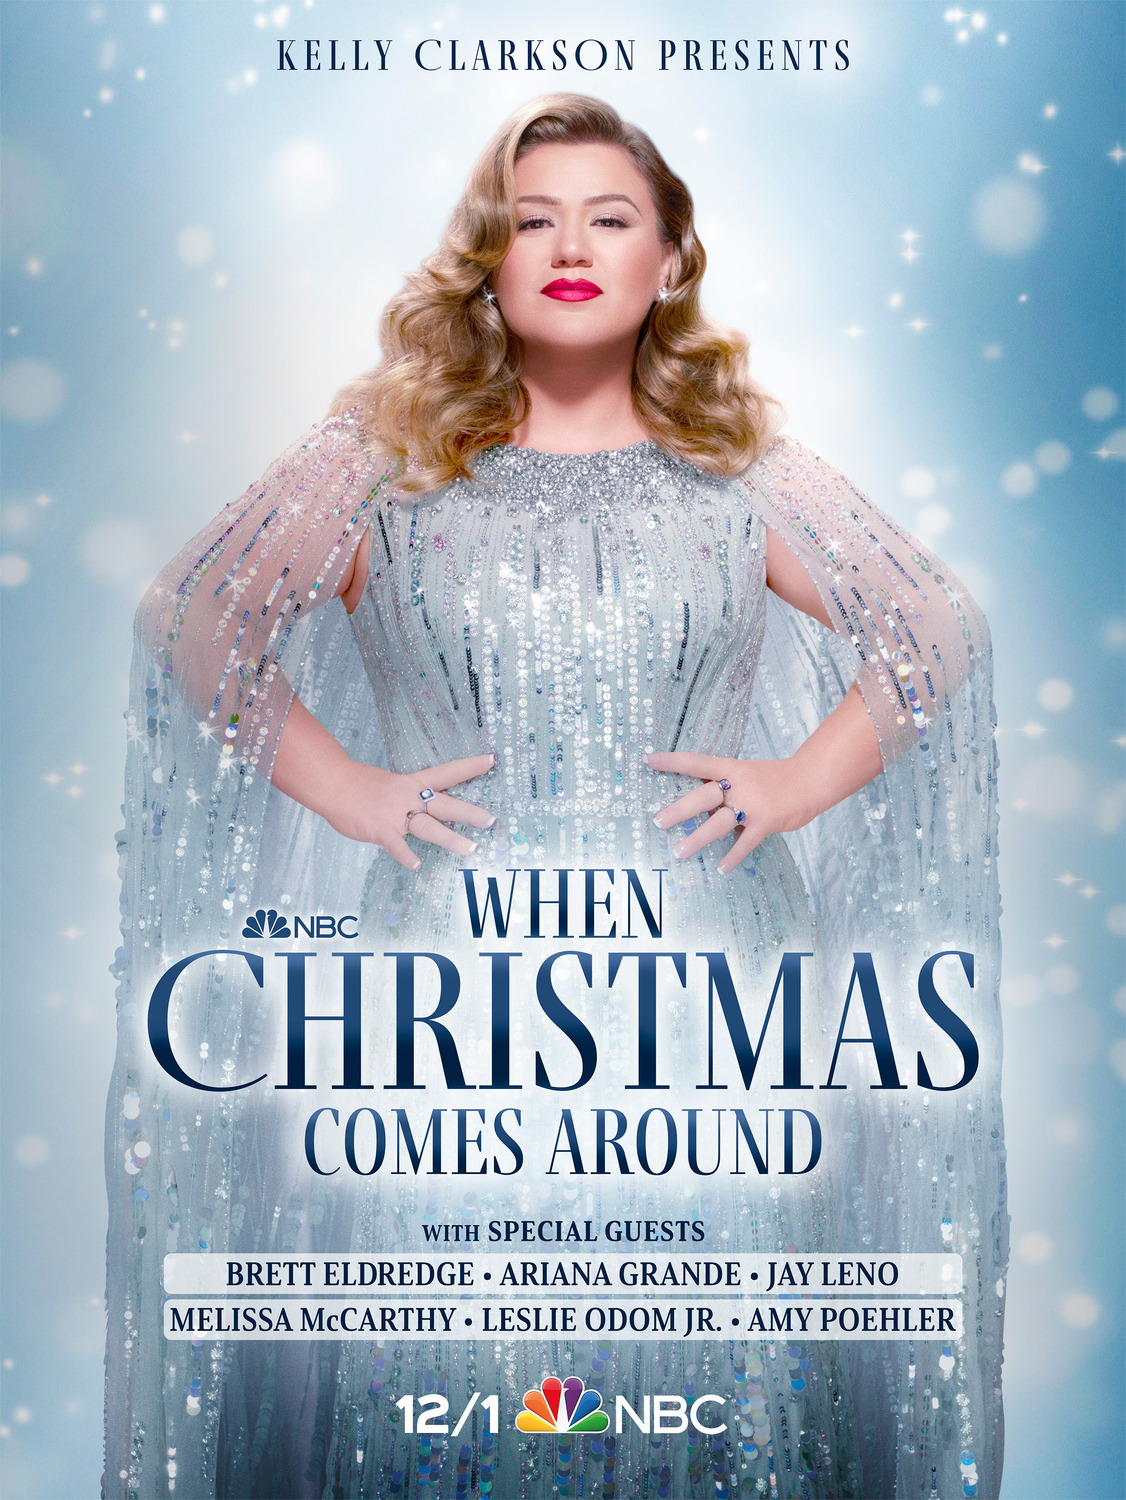 Extra Large TV Poster Image for Kelly Clarkson Presents: When Christmas Comes Around 